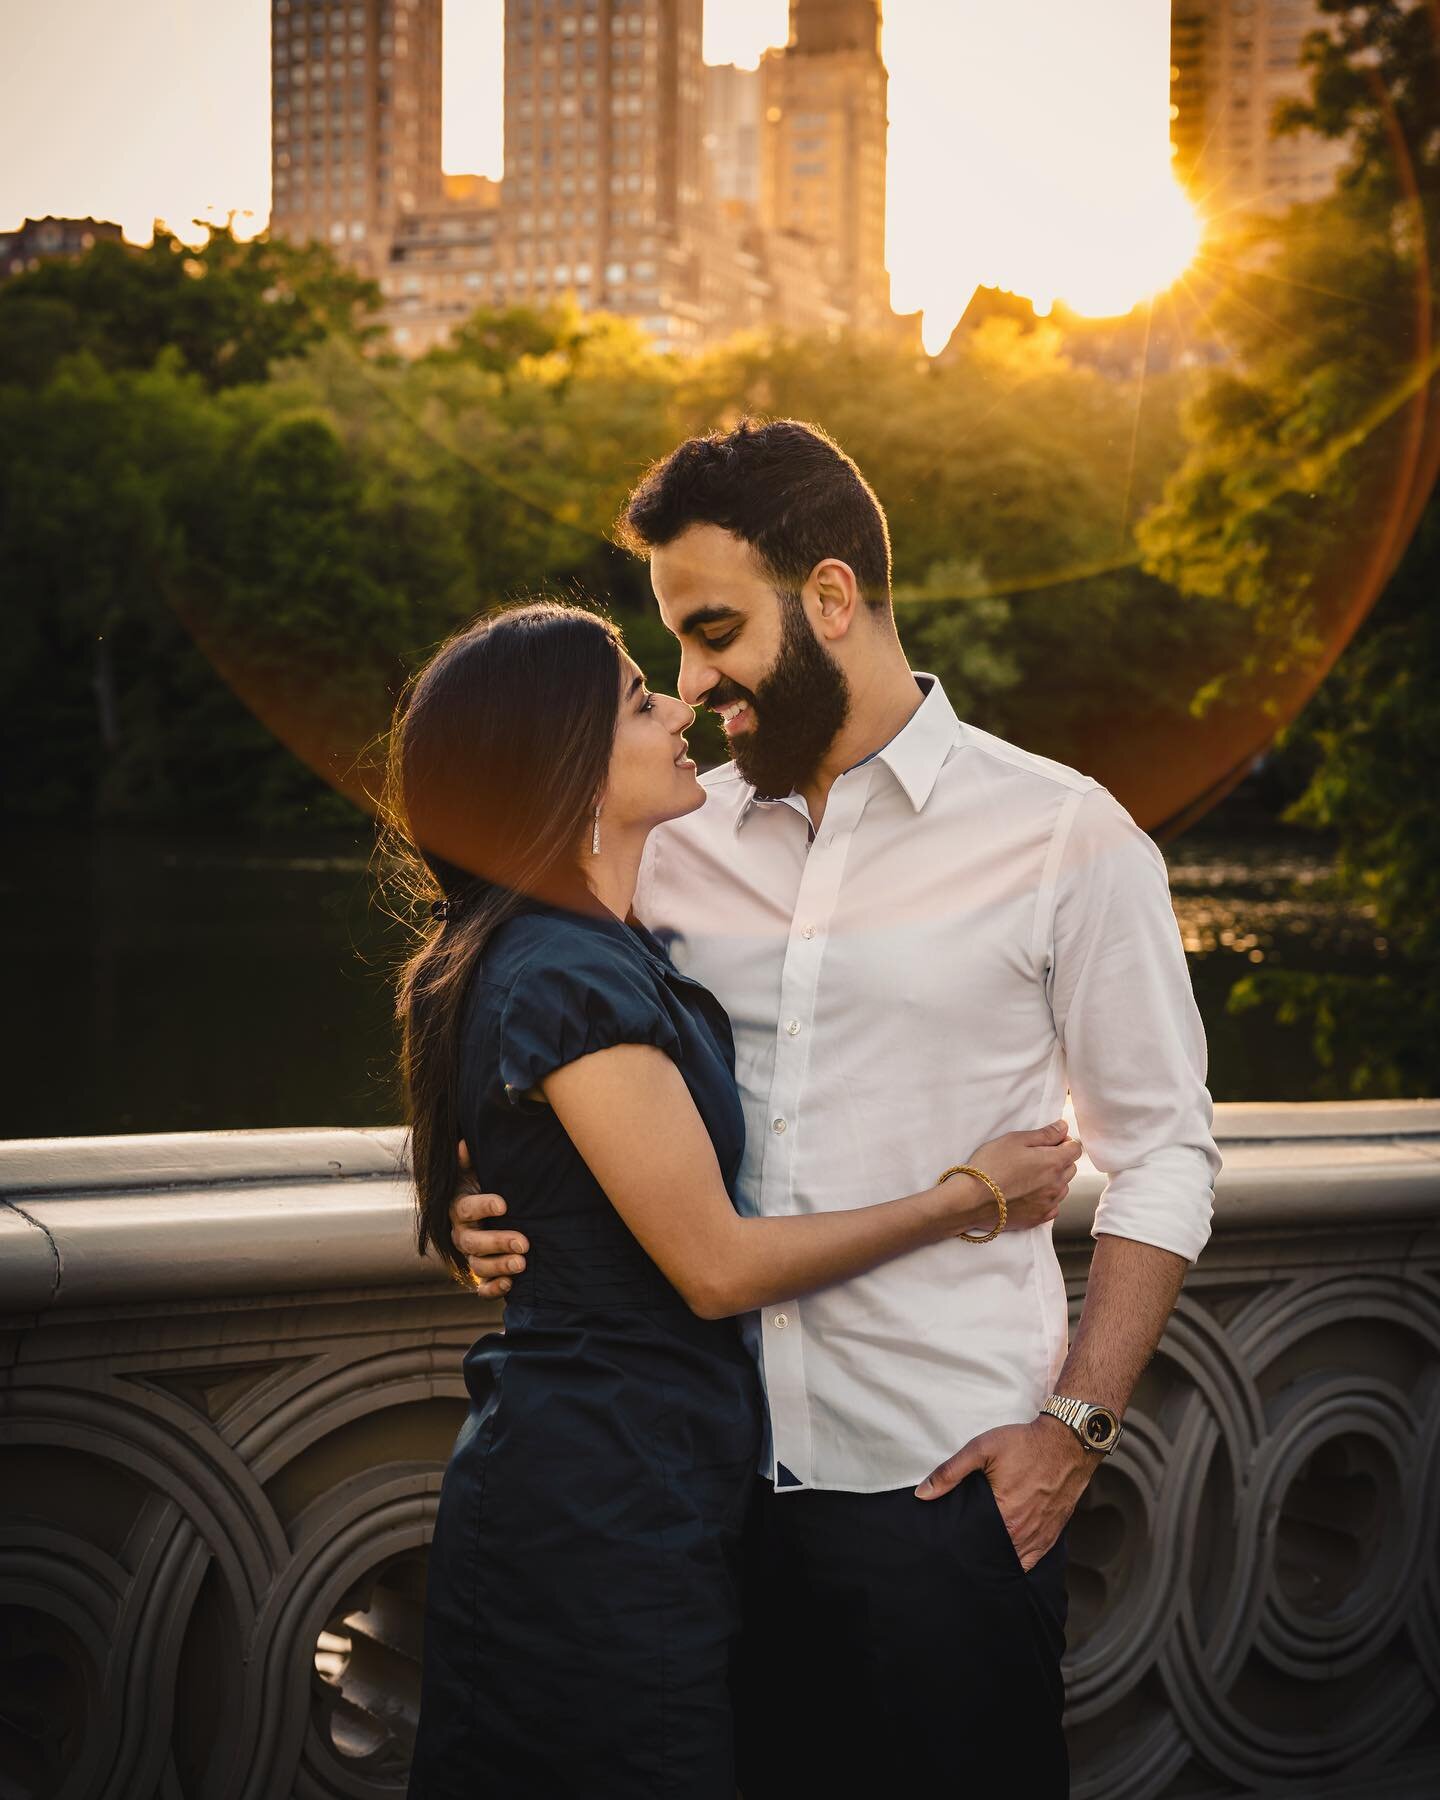 Central Park engagement session with Nina &amp; Elvis. We had a really great time! 
.
.
Thanks @gabemcclintock for these #helios sunflares. First time using them, and I like it!
.
.

#hudsonvalleyny #hudsonvalleywedding #upstatenywedding #upstatenywe